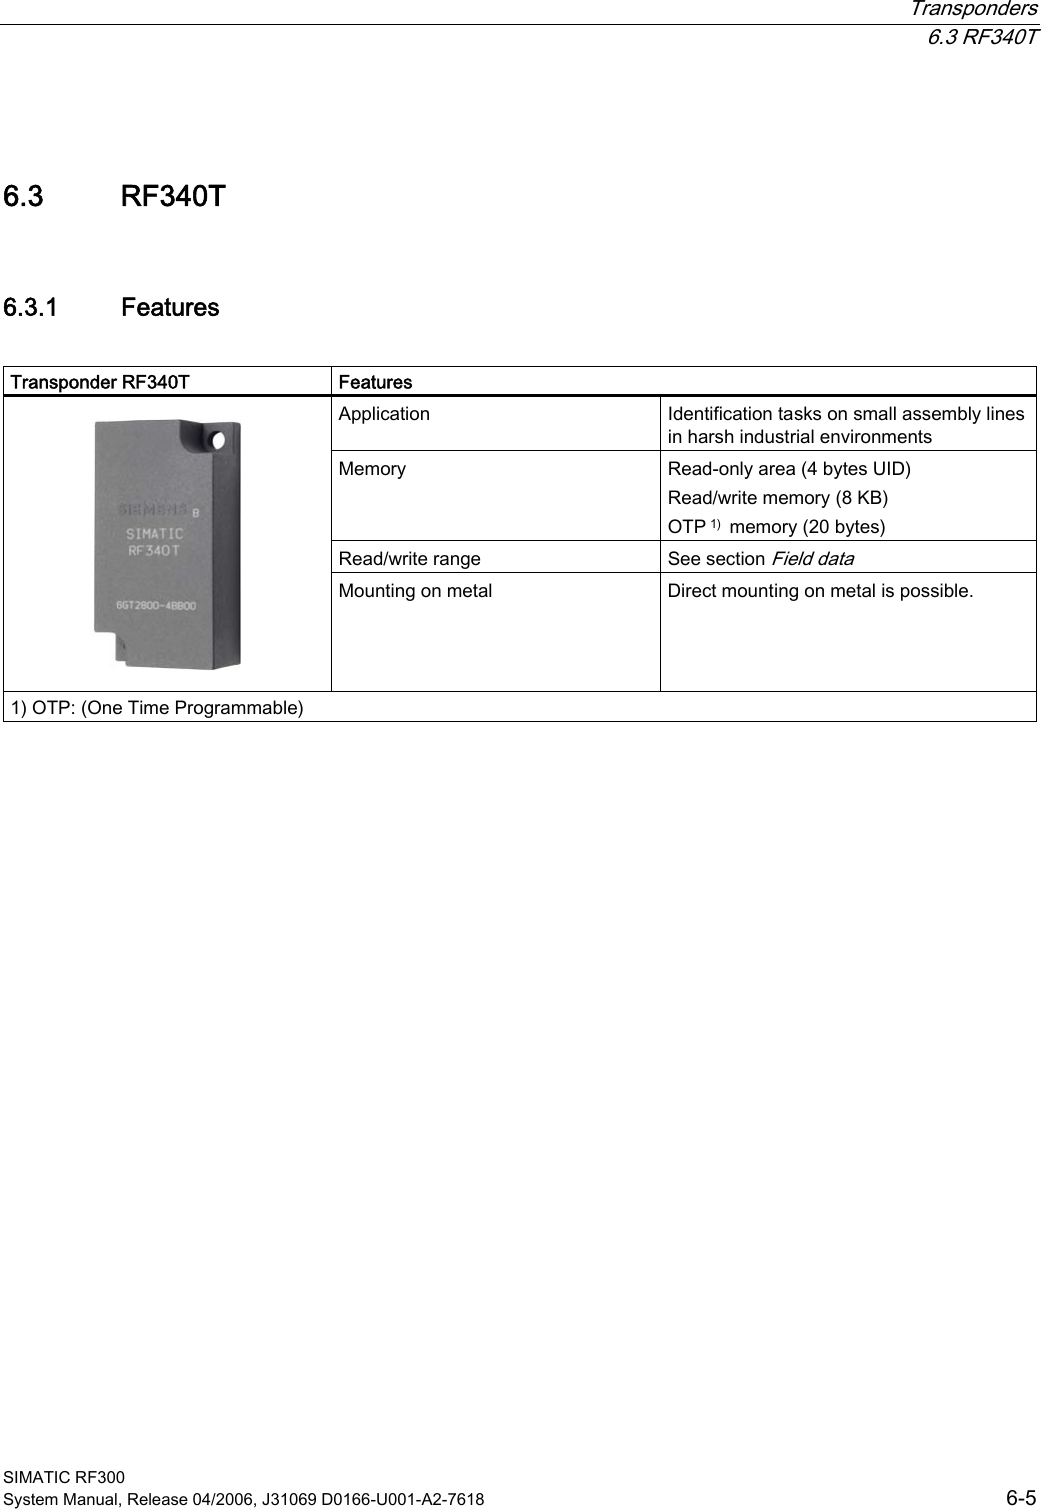  Transponders  6.3 RF340T SIMATIC RF300 System Manual, Release 04/2006, J31069 D0166-U001-A2-7618  6-5 6.3 6.3 RF340T 6.3.1  Features  Transponder RF340T  Features Application  Identification tasks on small assembly lines in harsh industrial environments Memory  Read-only area (4 bytes UID)  Read/write memory (8 KB) OTP 1)  memory (20 bytes)  Read/write range  See section Field data    Mounting on metal  Direct mounting on metal is possible. 1) OTP: (One Time Programmable)  